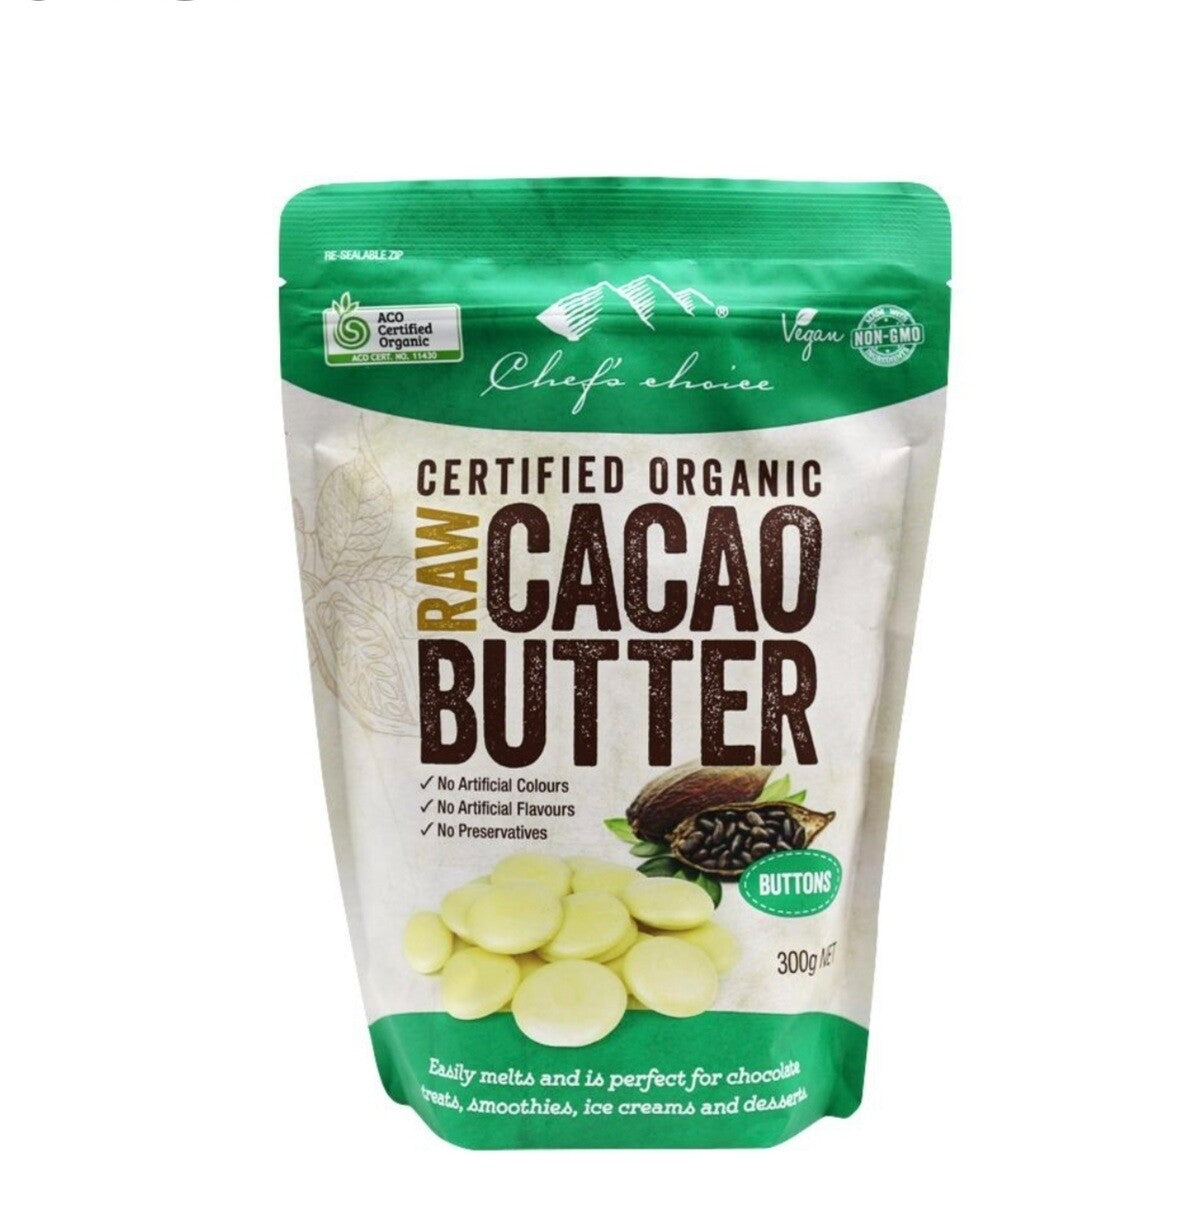 Chefs Choice Certified Organic Cacao Butter 300g